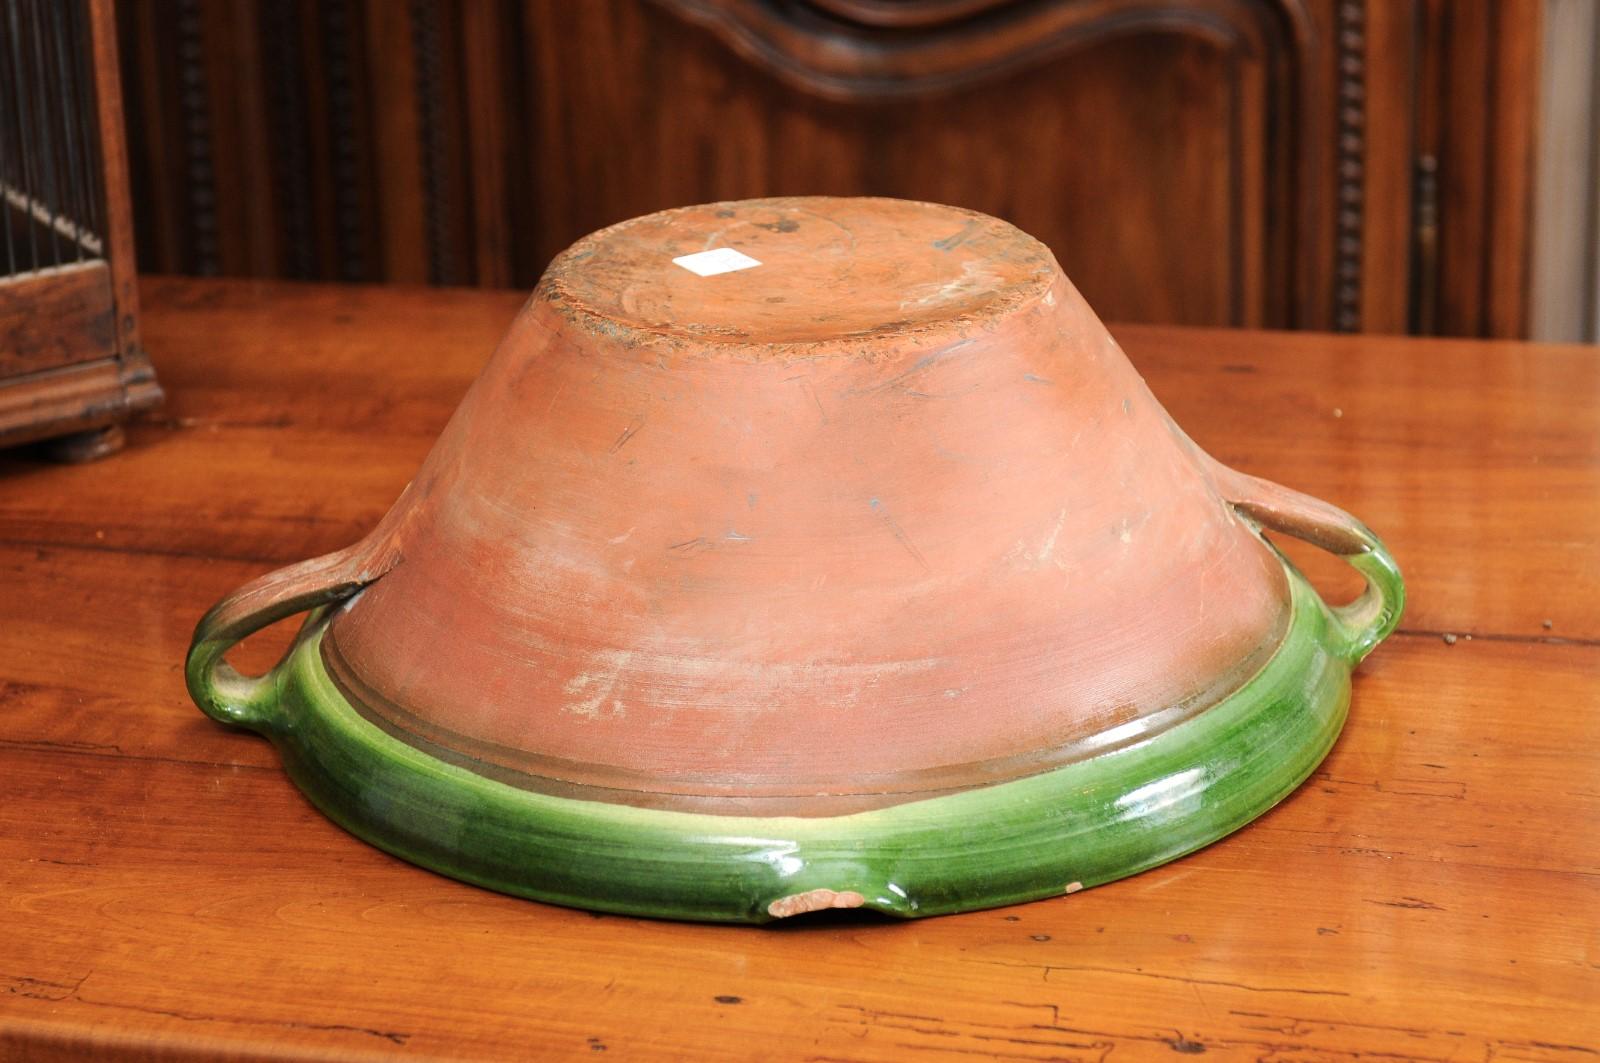 19th Century French 1850s Provincial Green Glazed Terracotta Bowl with Handles and Spout